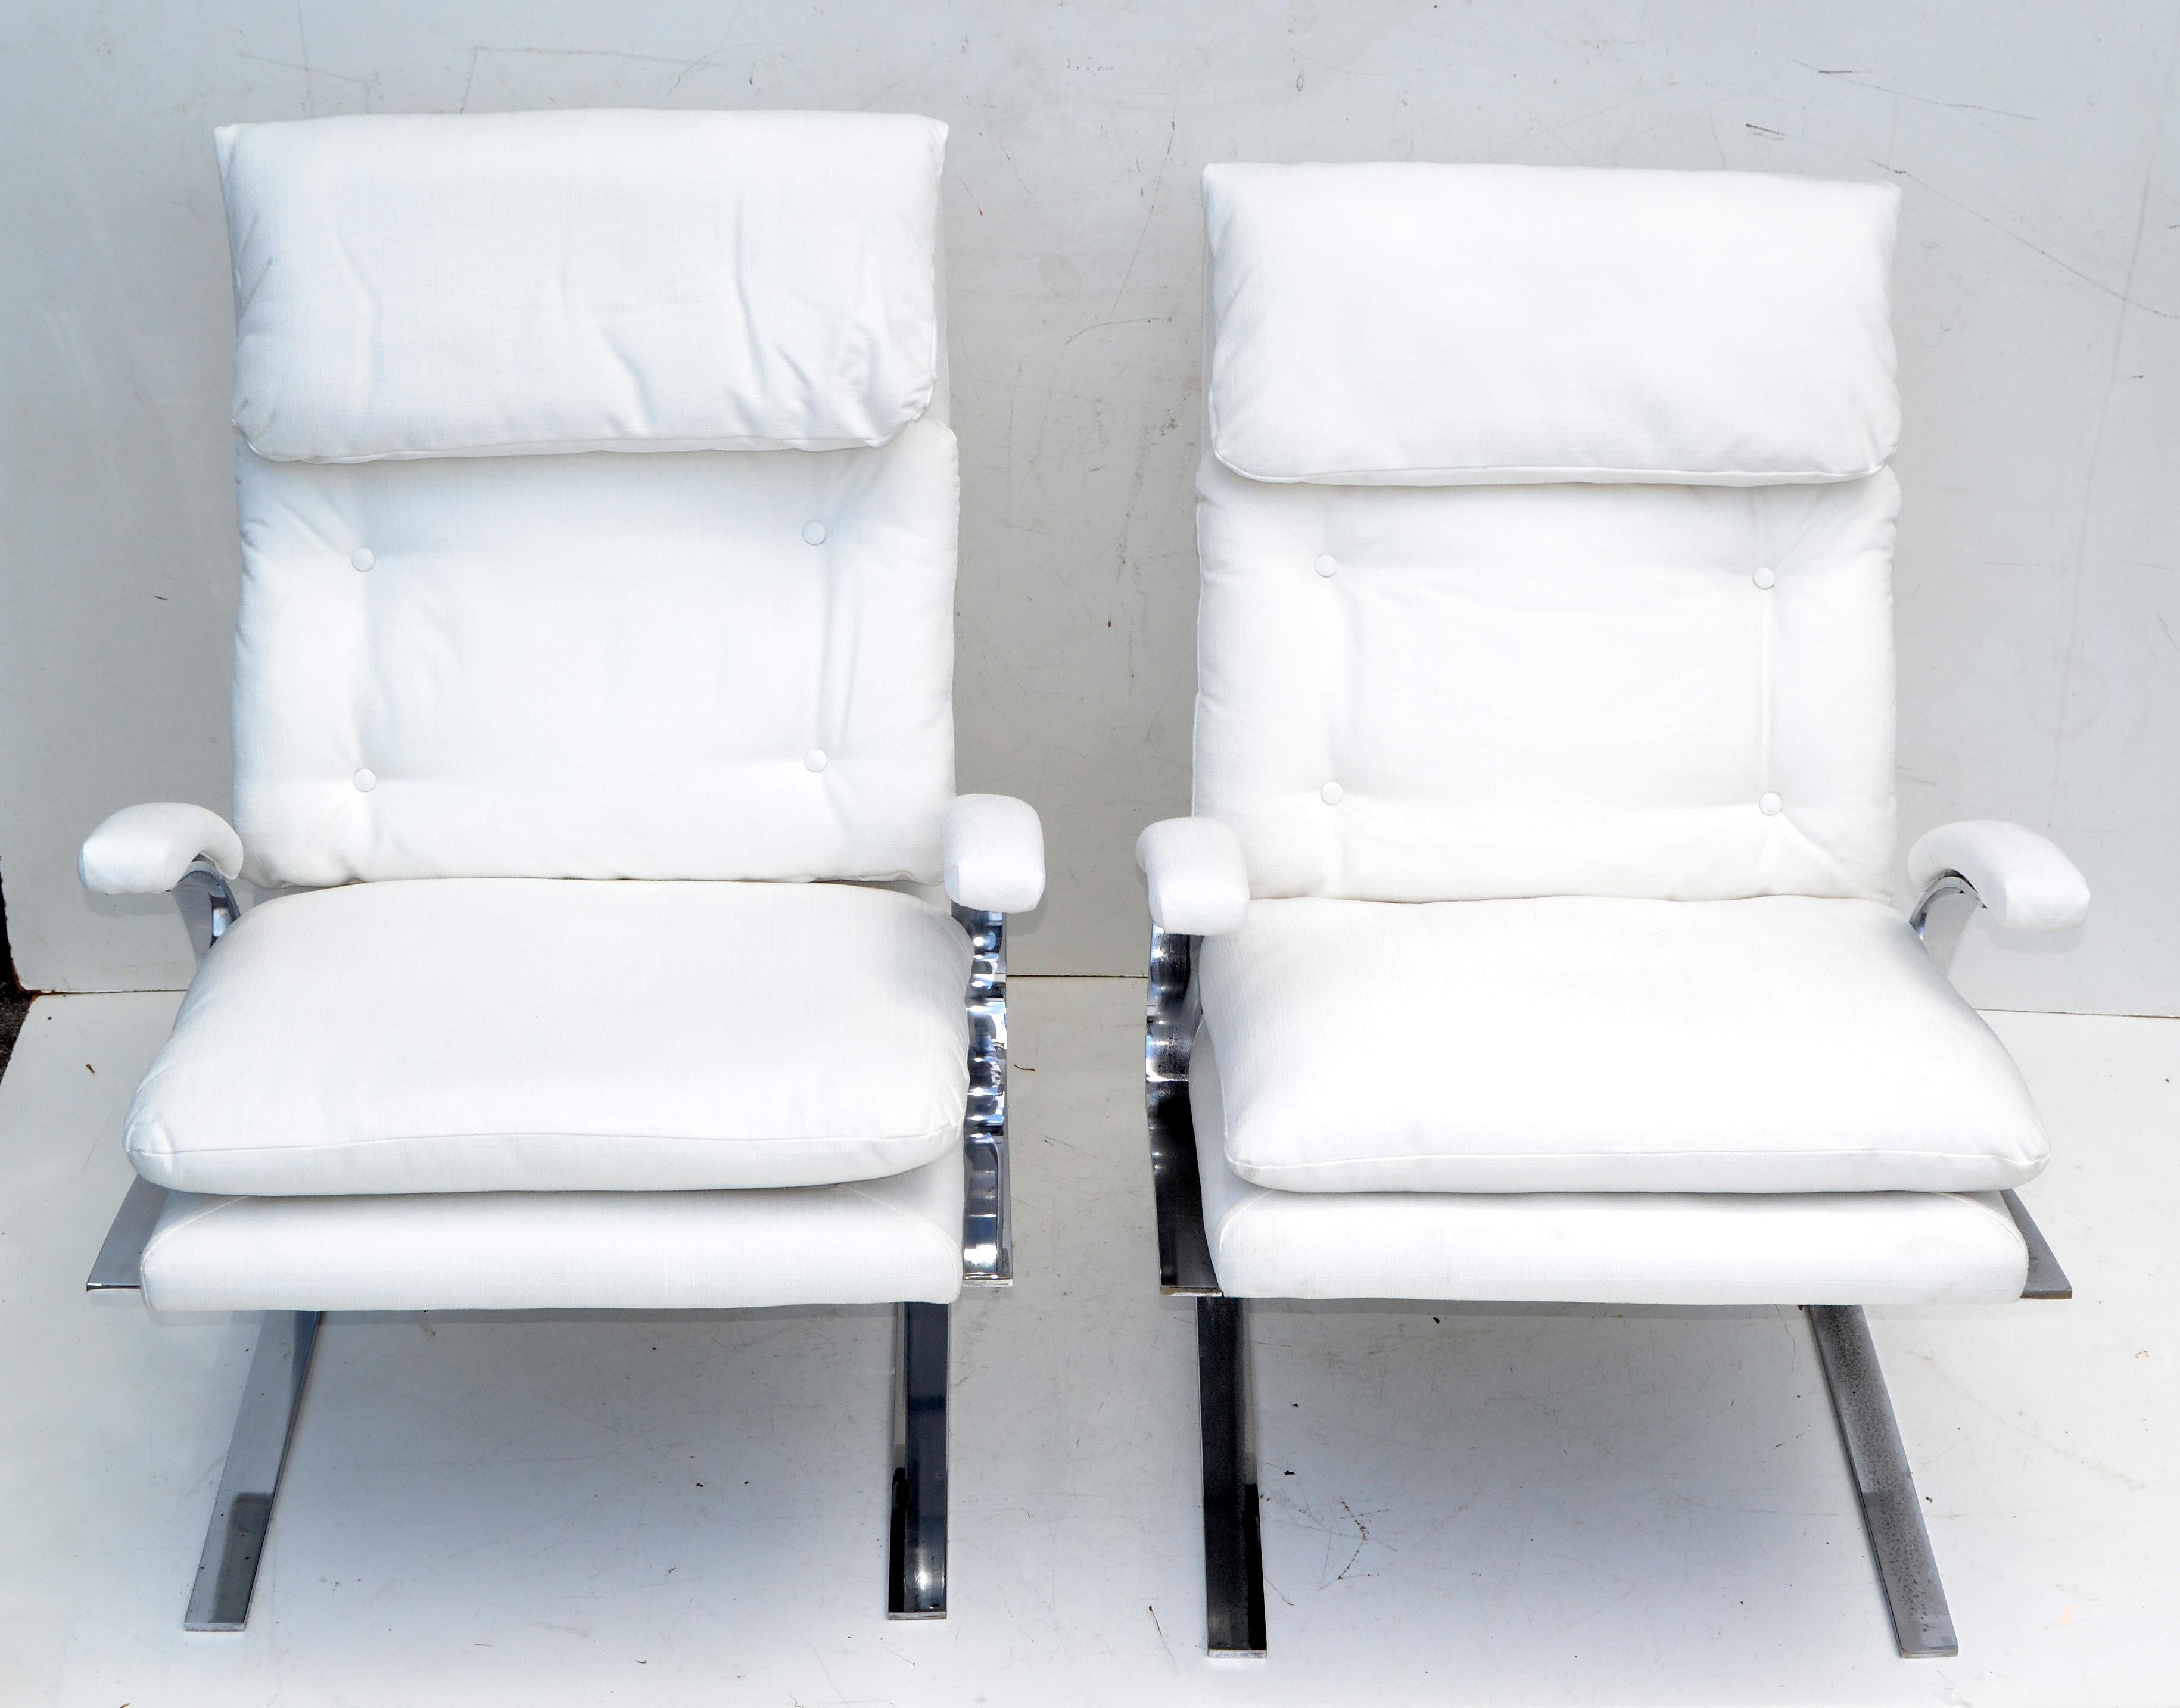 Pair of Saporiti style Cantilever lounge chairs in polished chrome with off white Bouclé Fabric.
Italian Mid-Century Modern design for any interior design.
The pair is ready for a new Home.
Measures: 
Arm height: 25 inches.
Seat height: 21